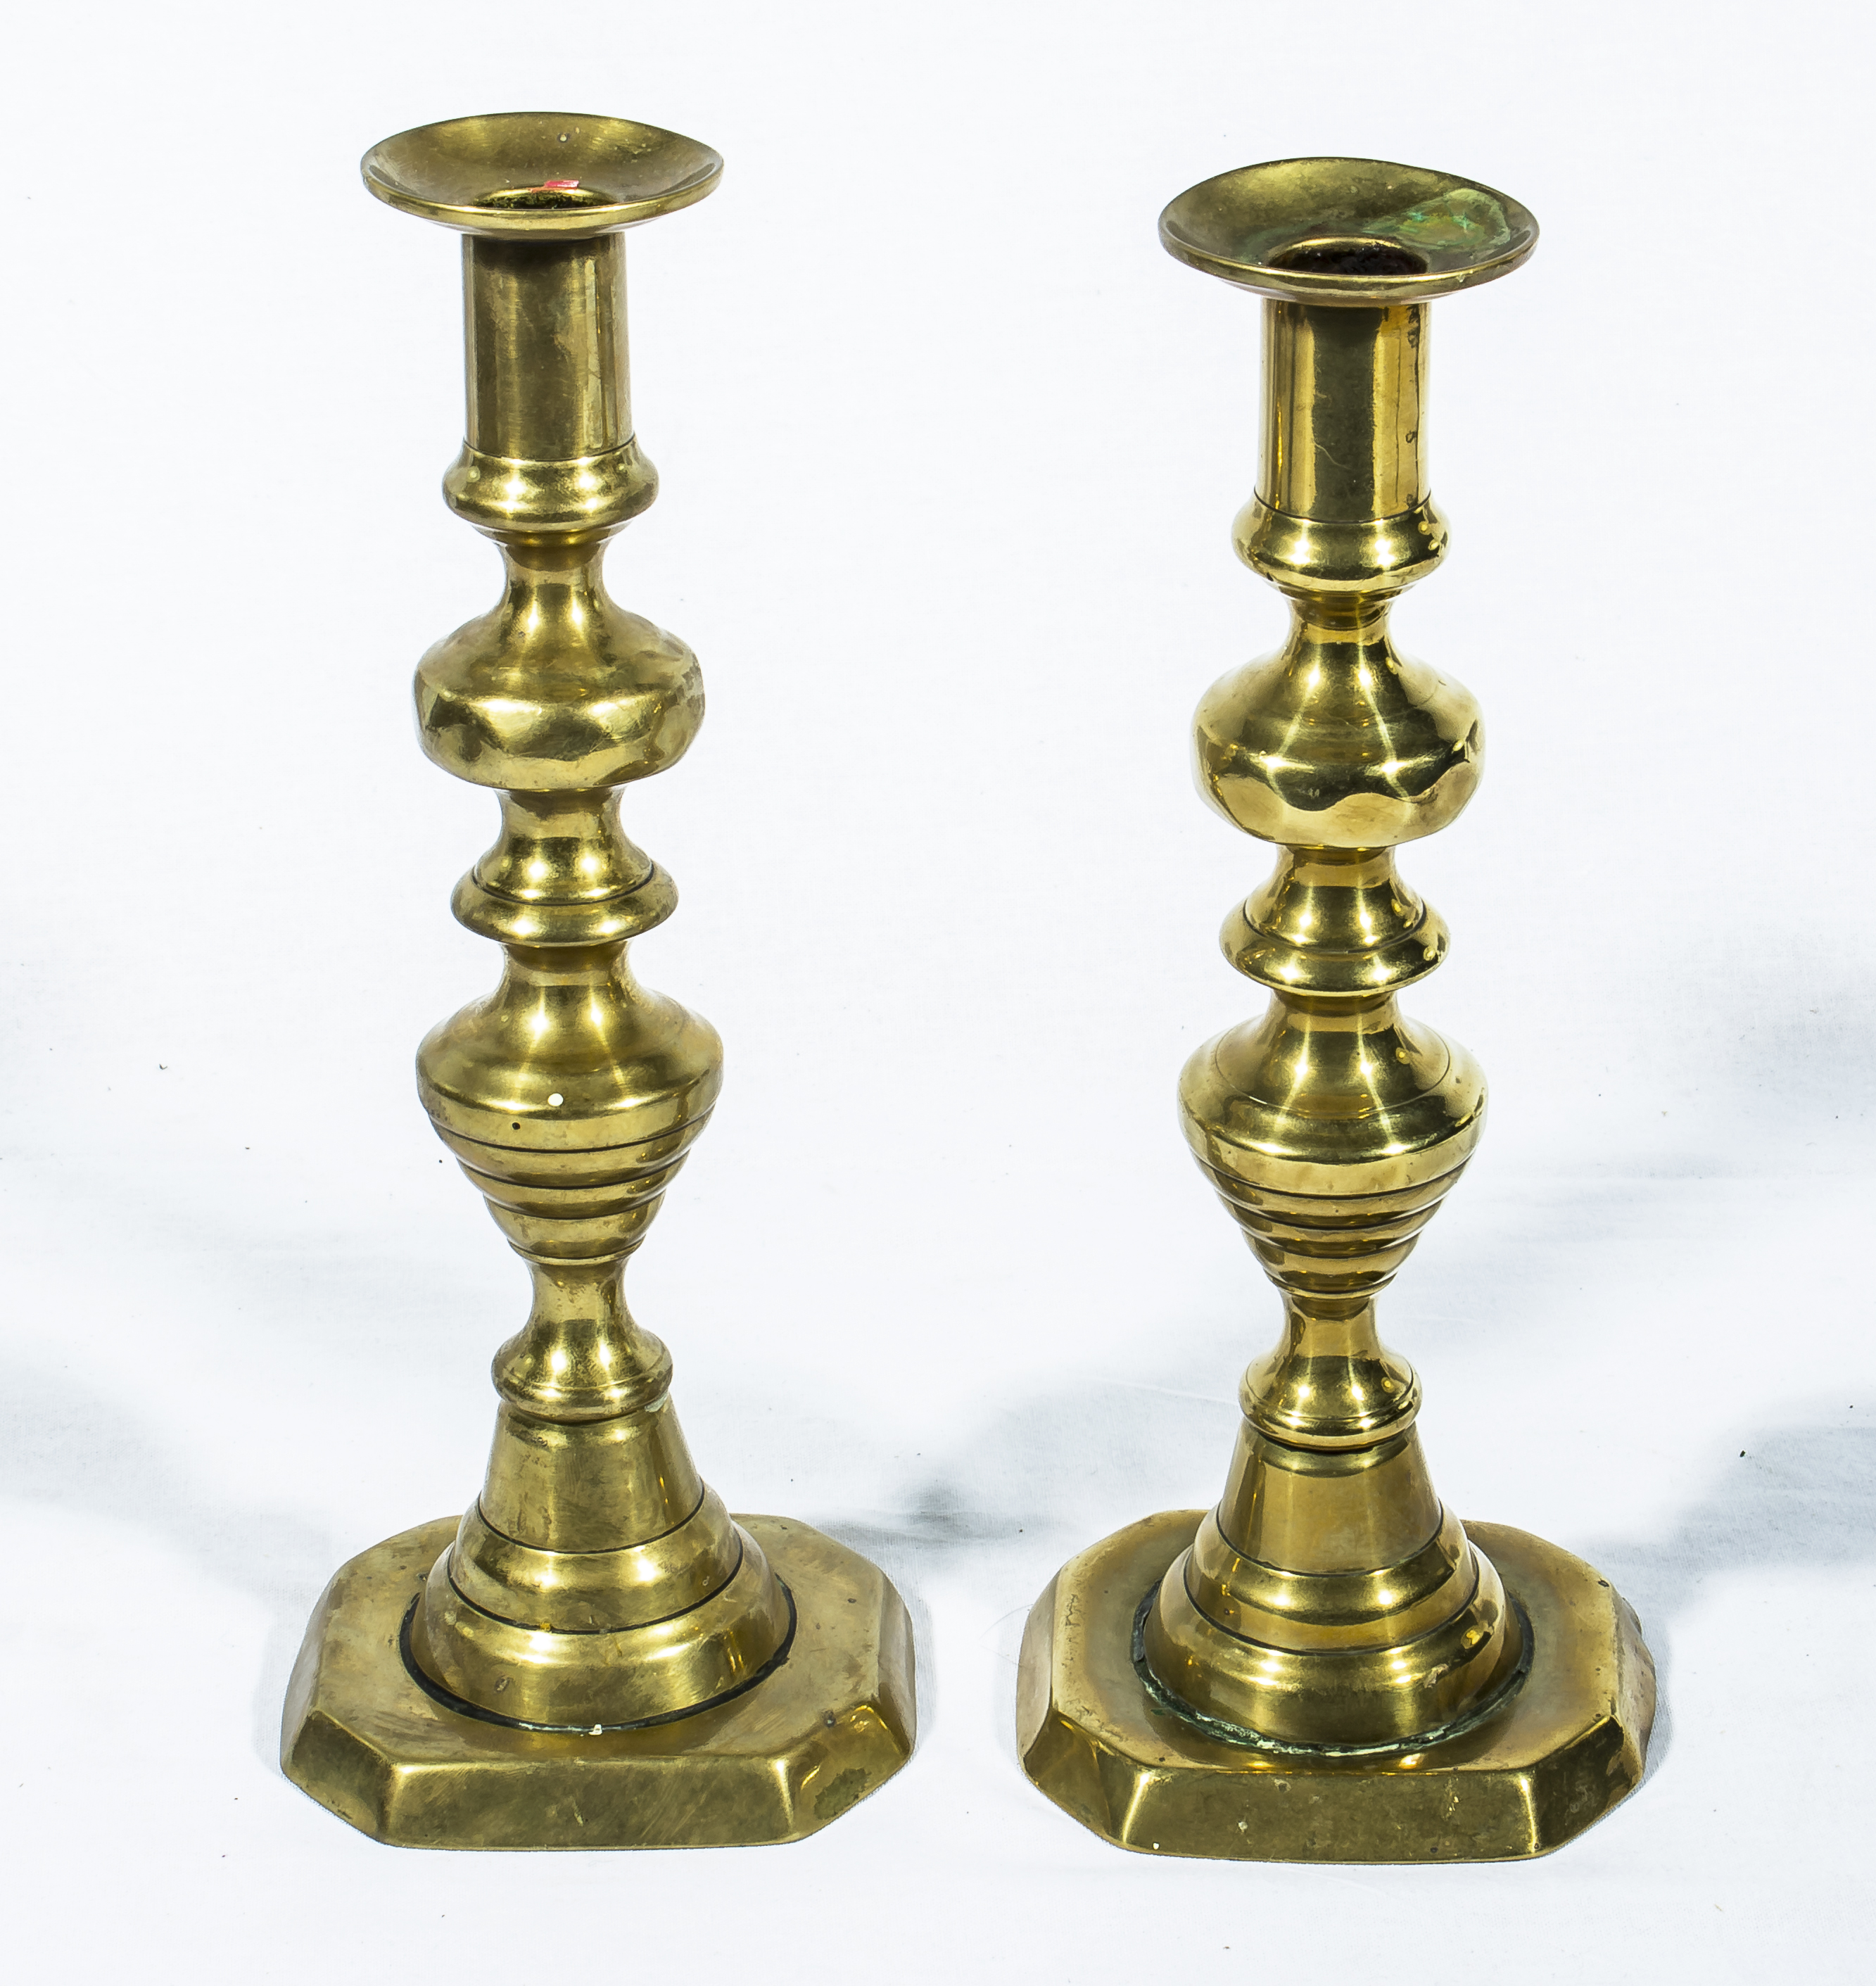 Two pairs of brass candlesticks - Image 2 of 3